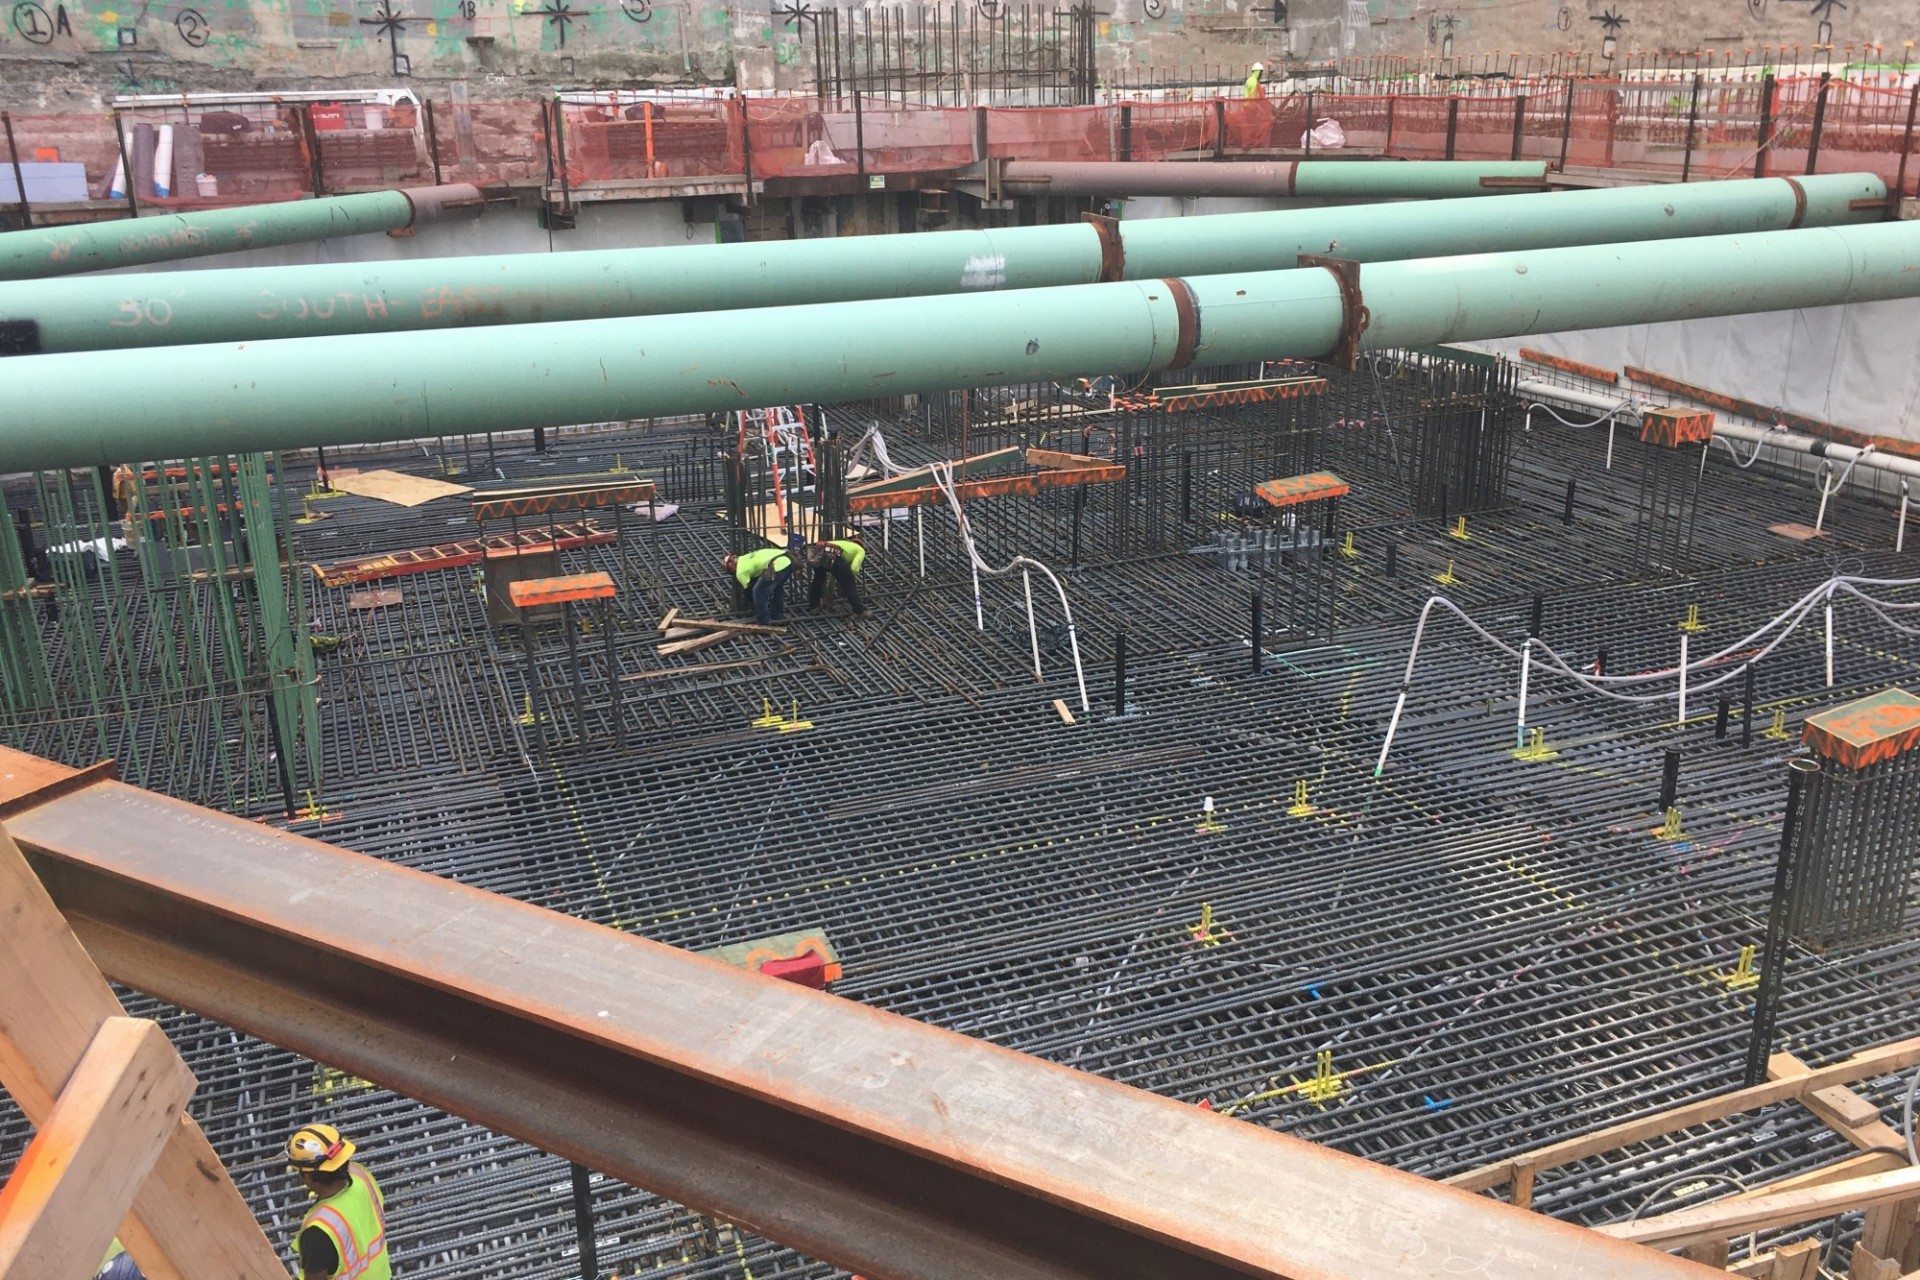 An view of the 600 W. 125th Street construction site facing south, with thousands of rebar placed on the ground and large green pipes running overhead.